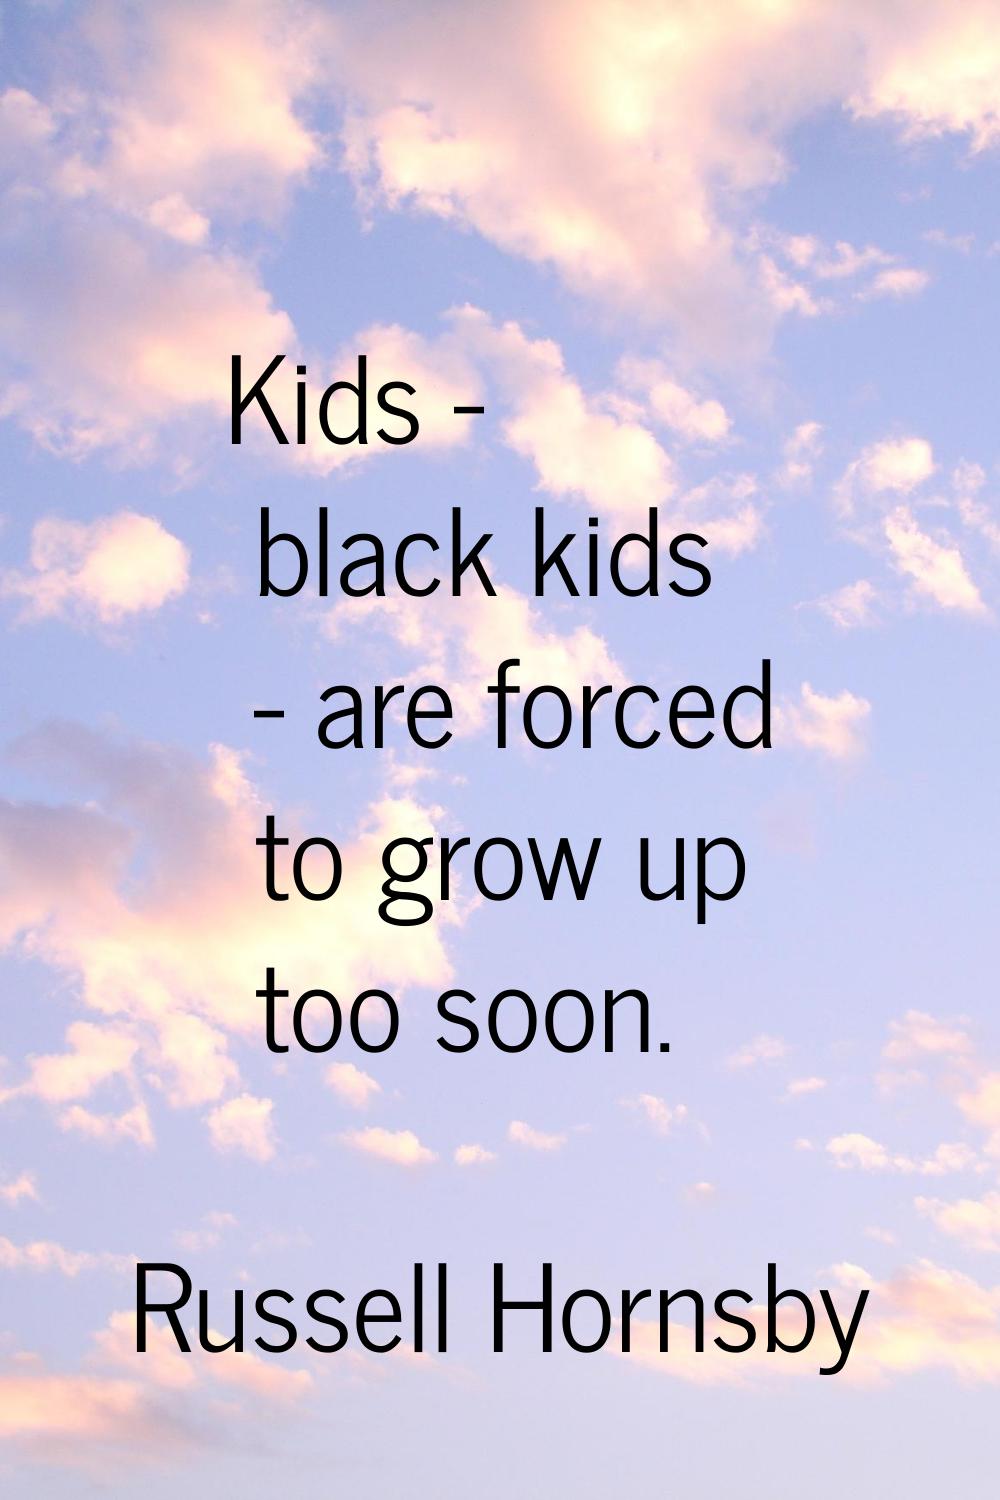 Kids - black kids - are forced to grow up too soon.